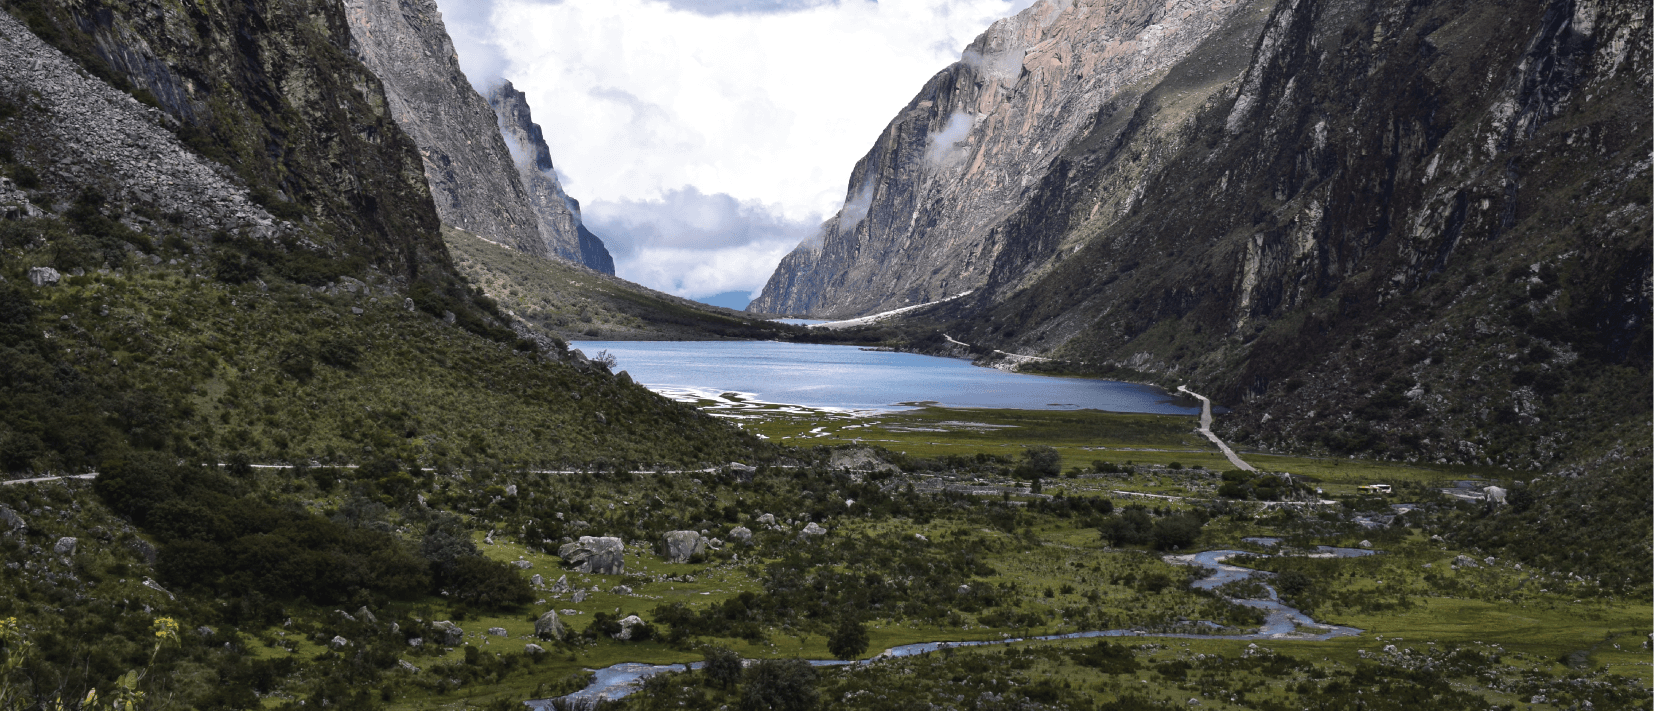 Choose from among 9 great Huaraz hikes you can do in a day. image